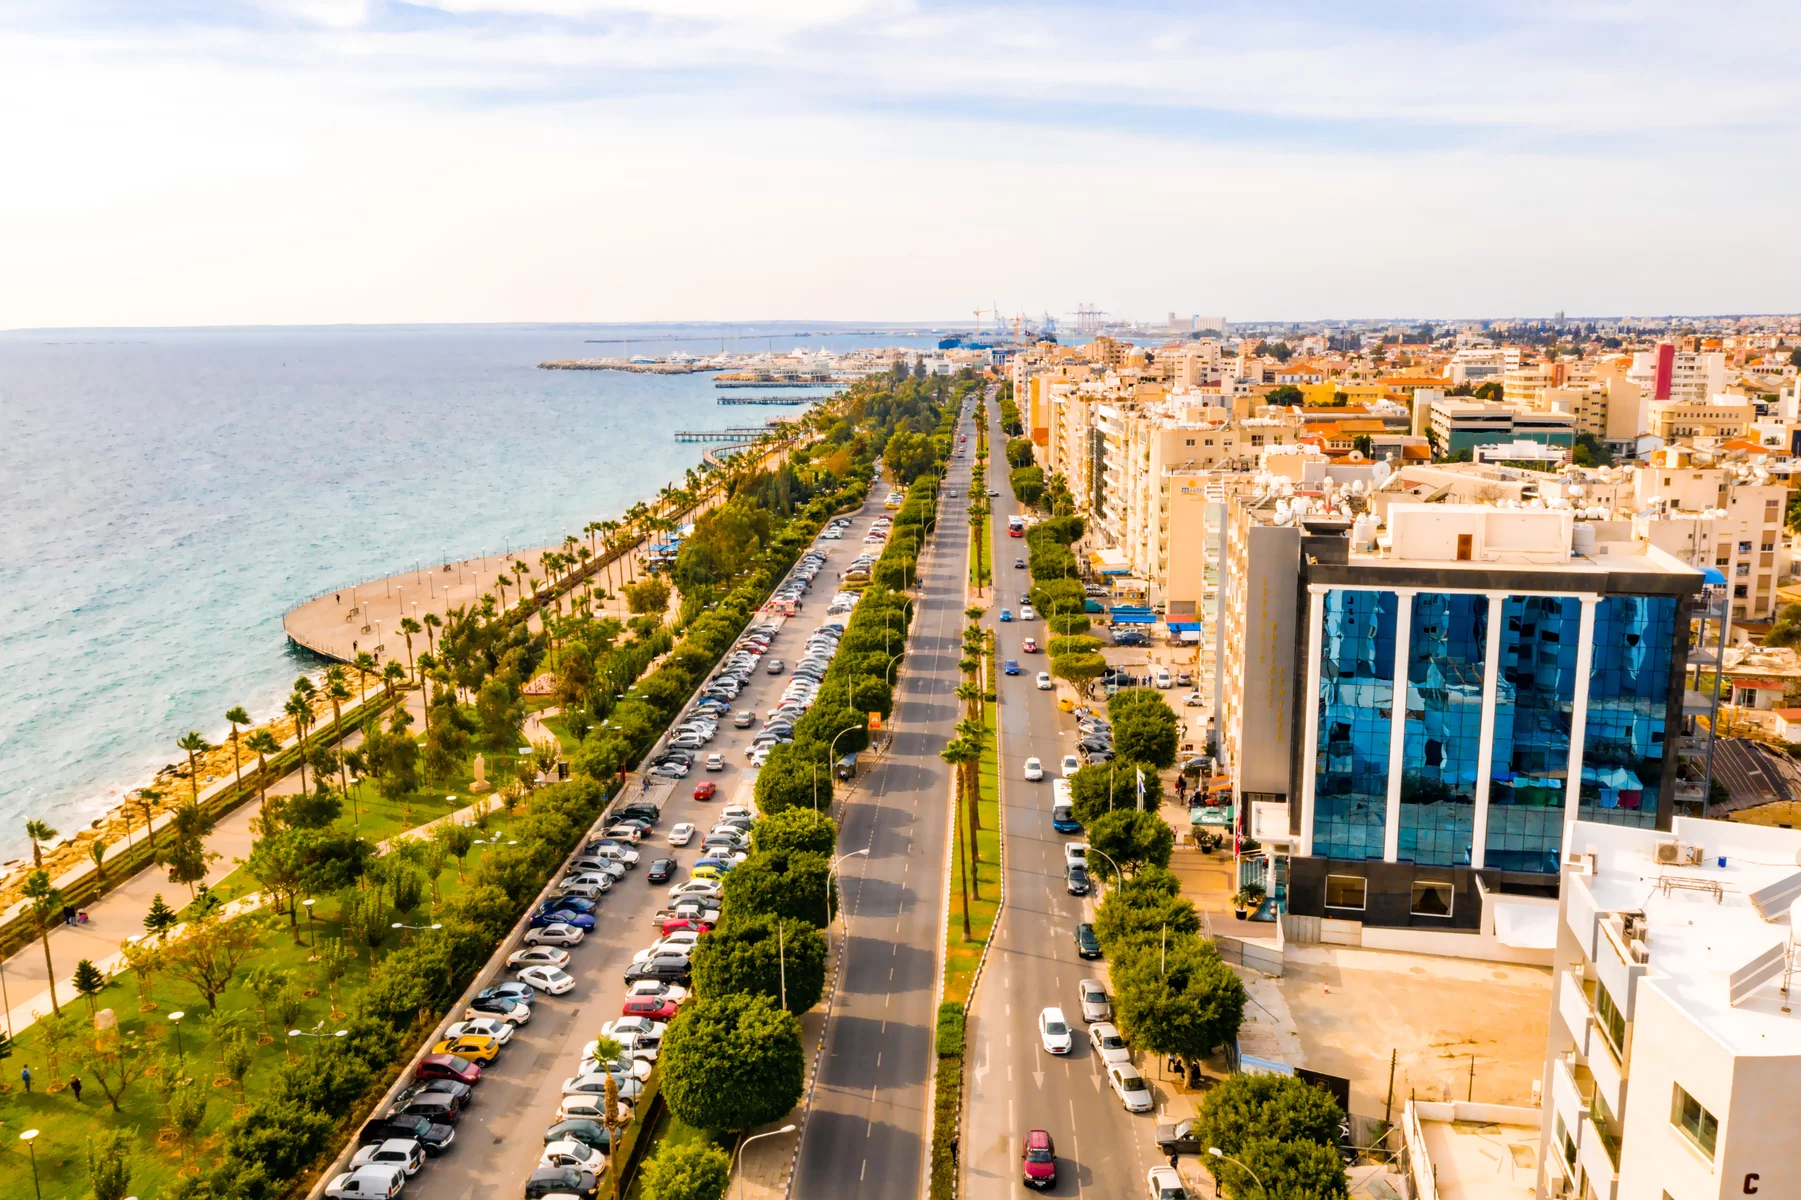 Aerial view of the road and buildings on the shore of Limassol, Northern Cyprus